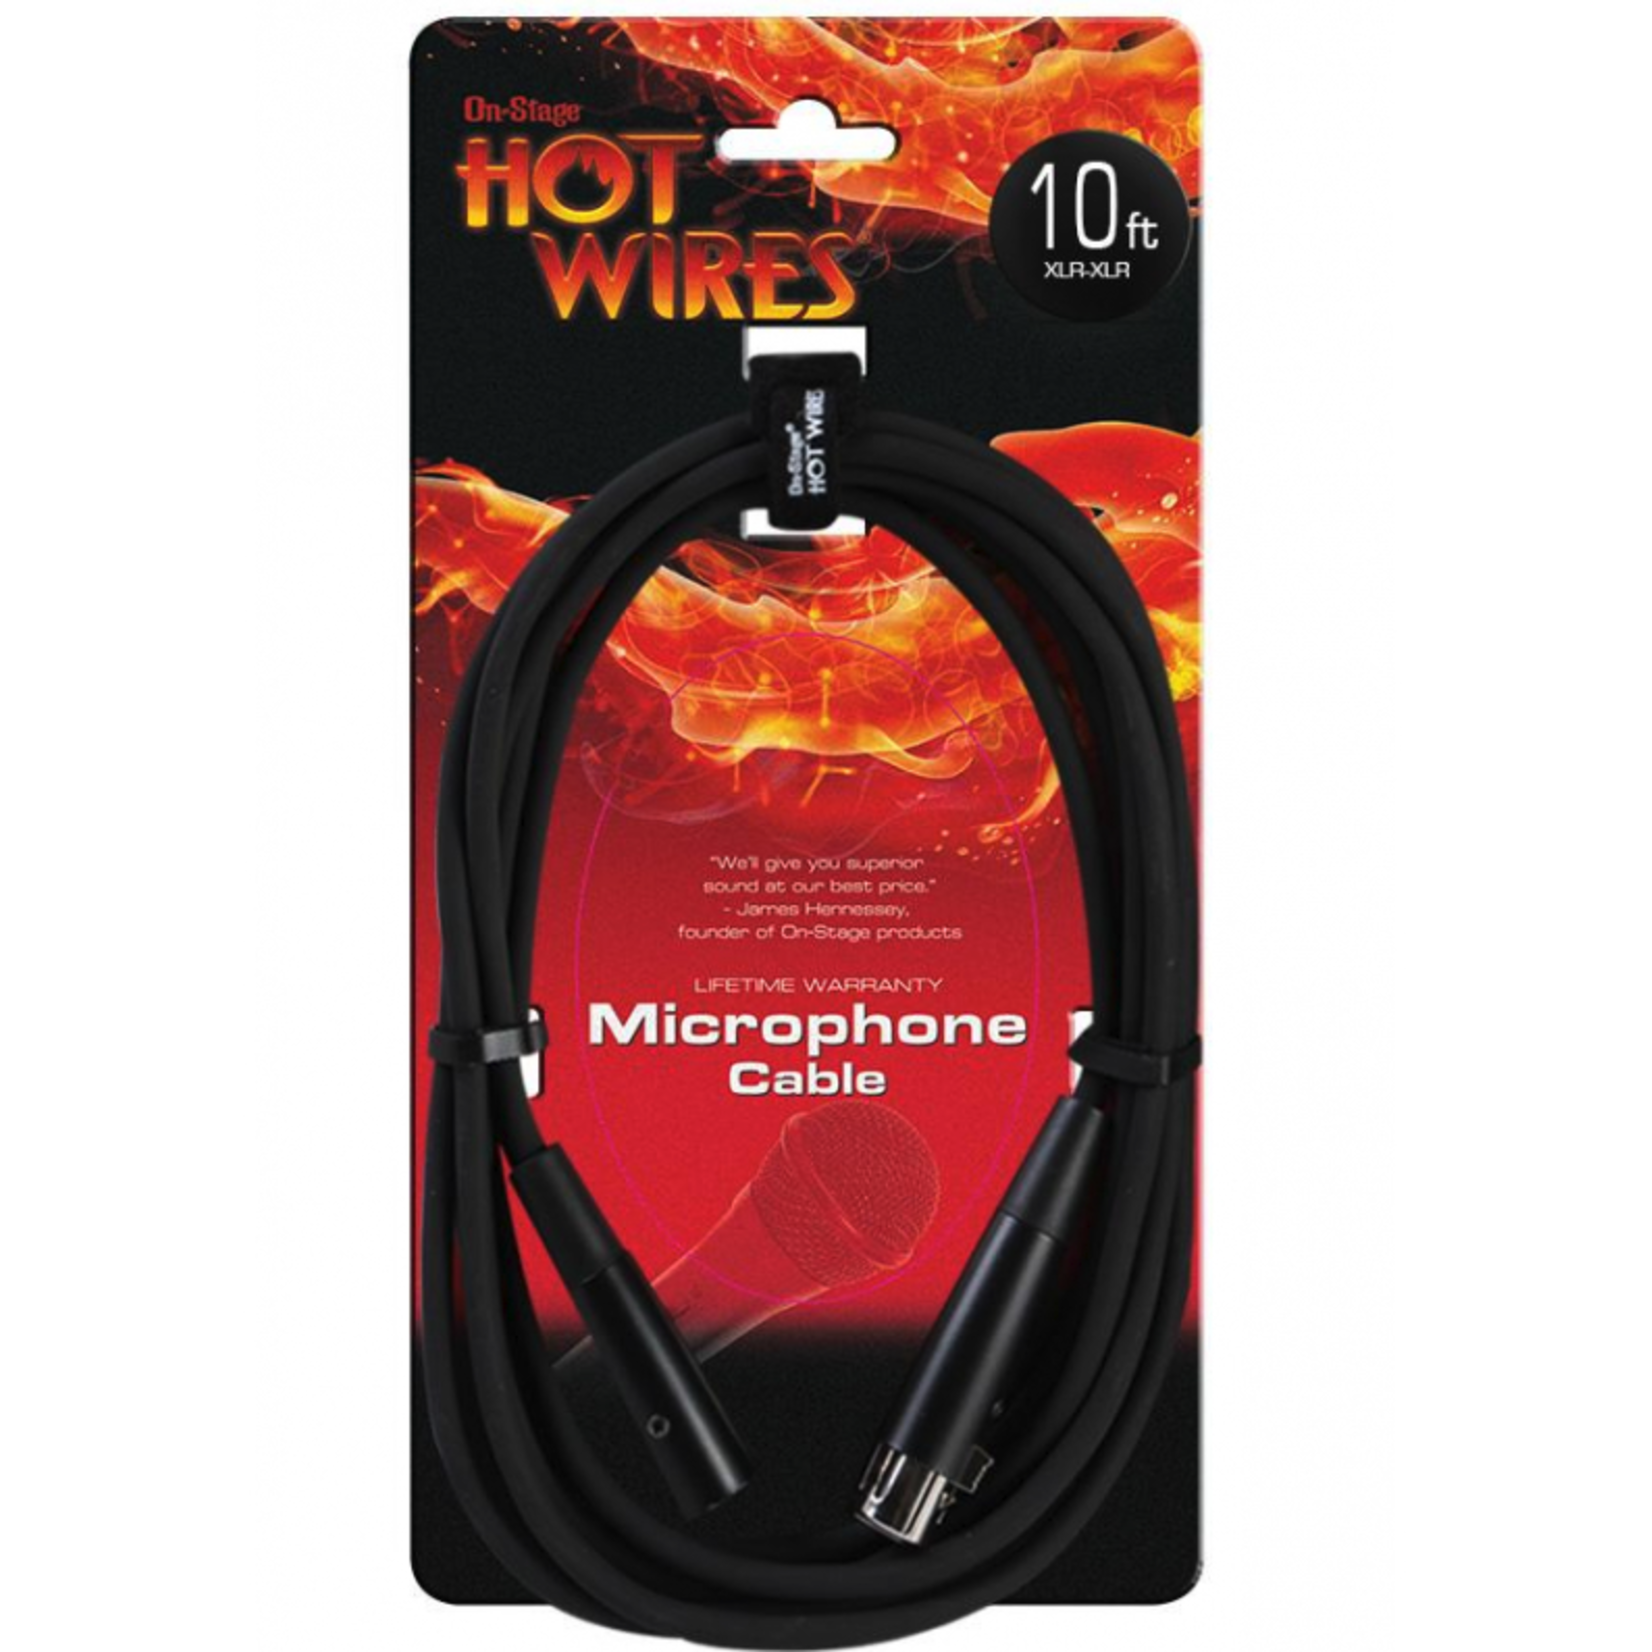 On-Stage Hot Wires 10" XLR Cable